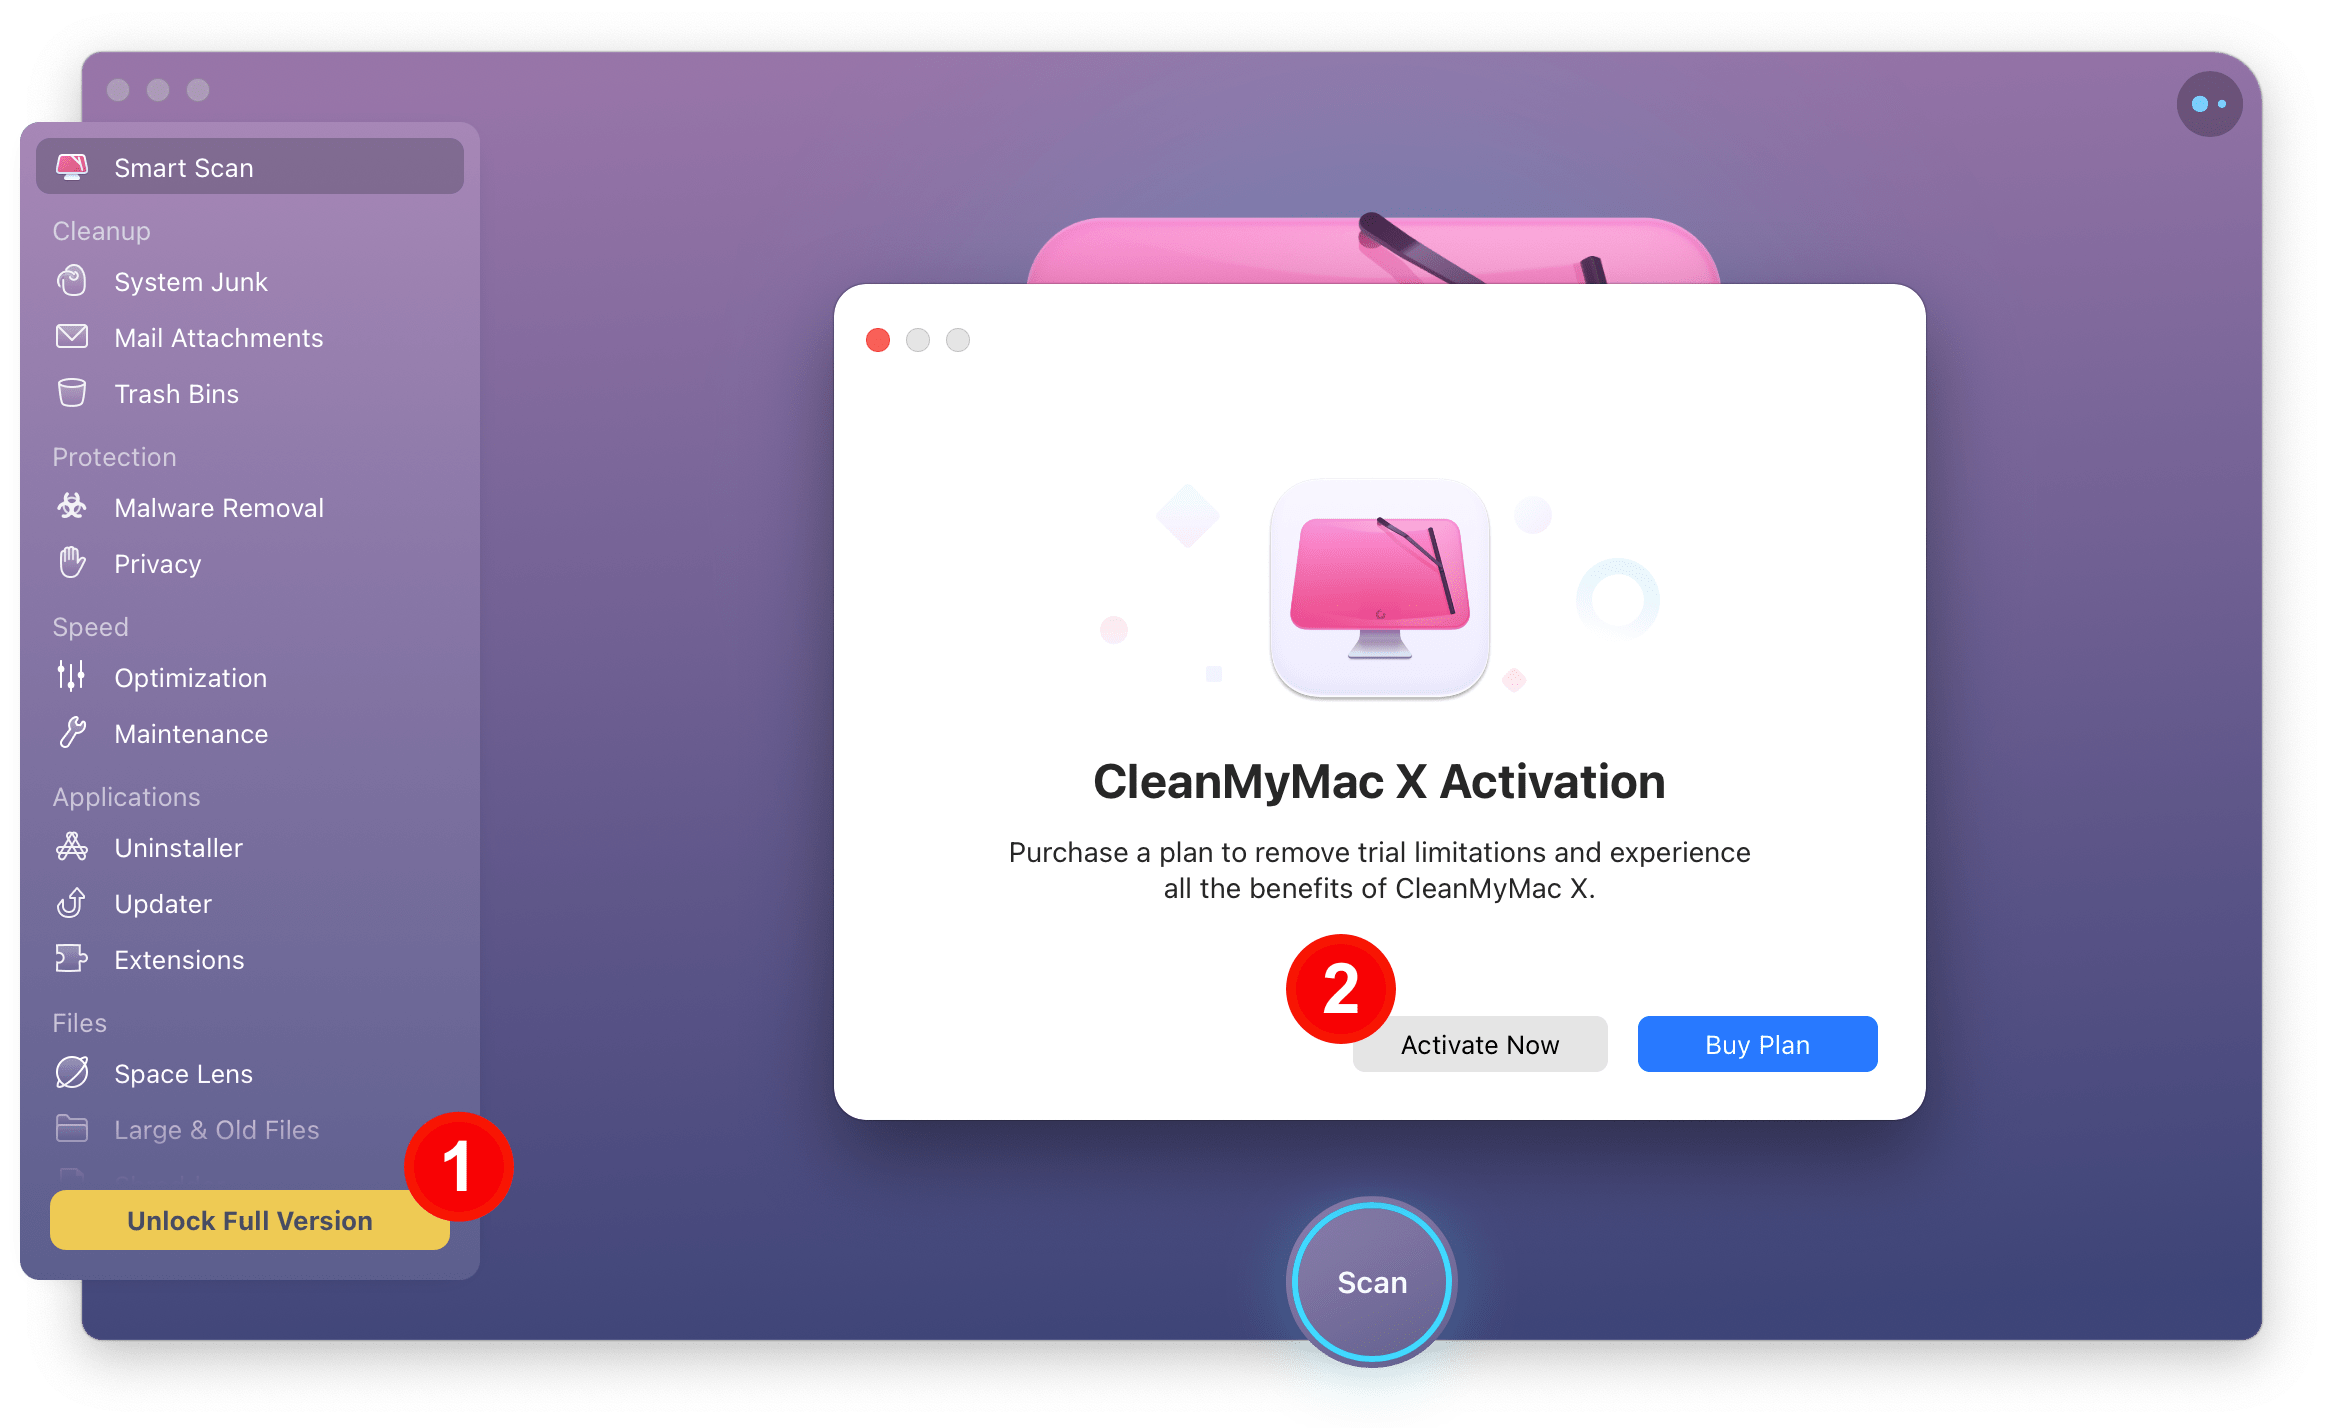 where is my account information for clean my mac